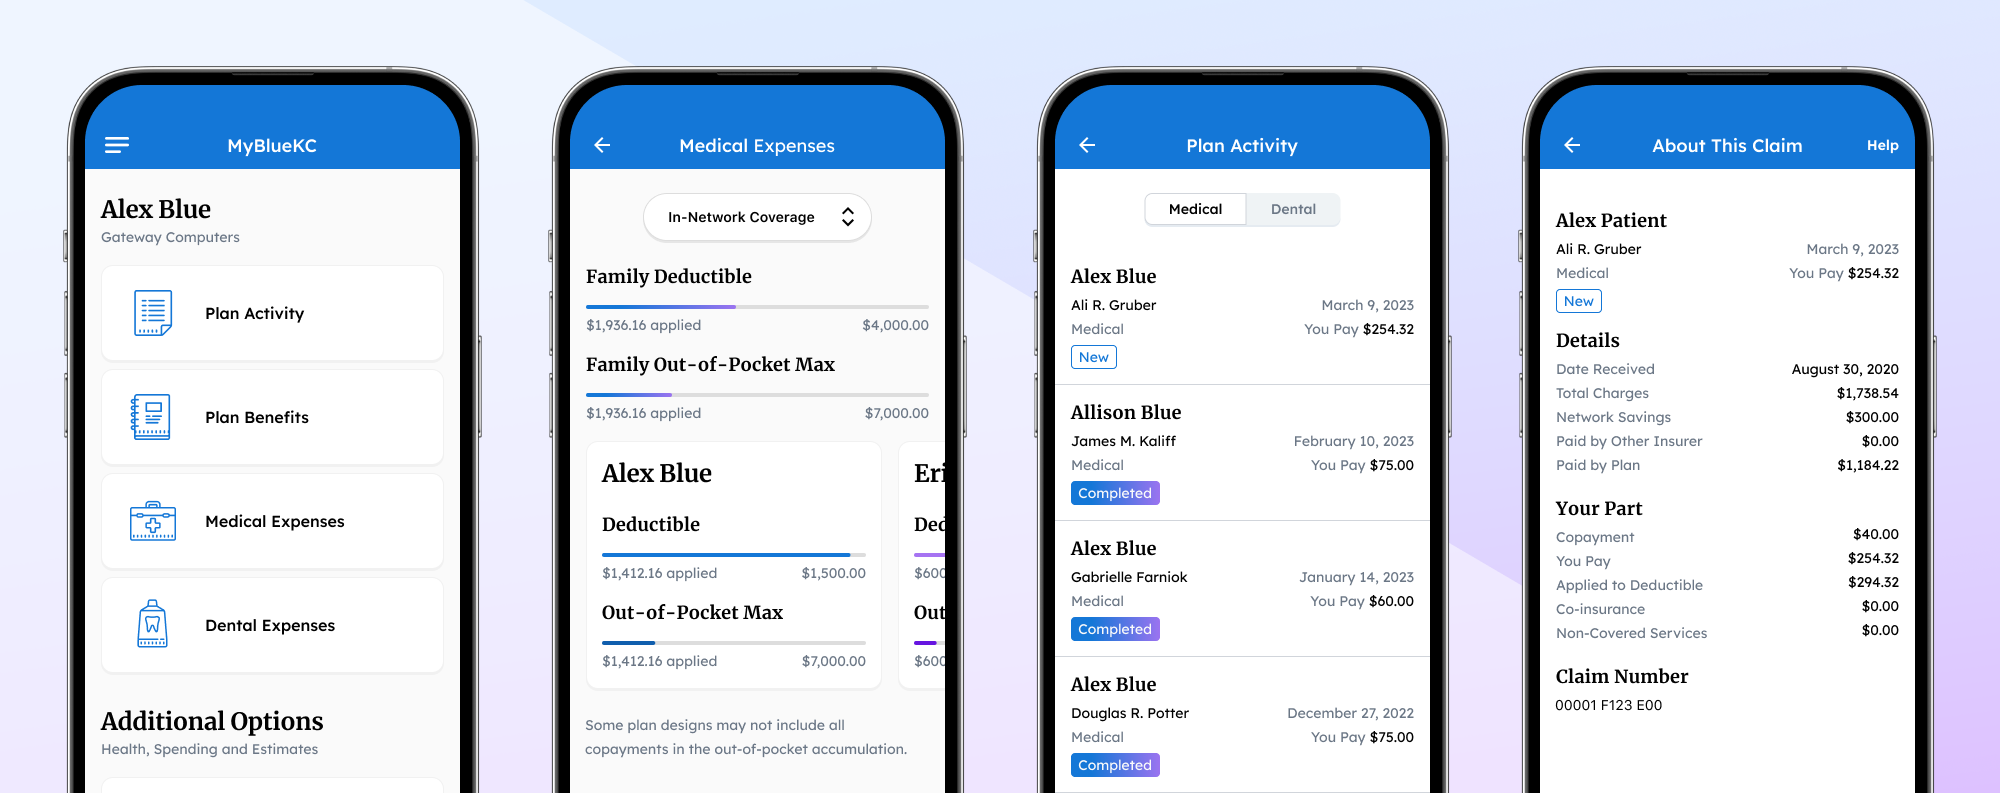 Design mockups for a health insurance app, including dashboard, deductibles and claims. Featured design work from Sean Berger.